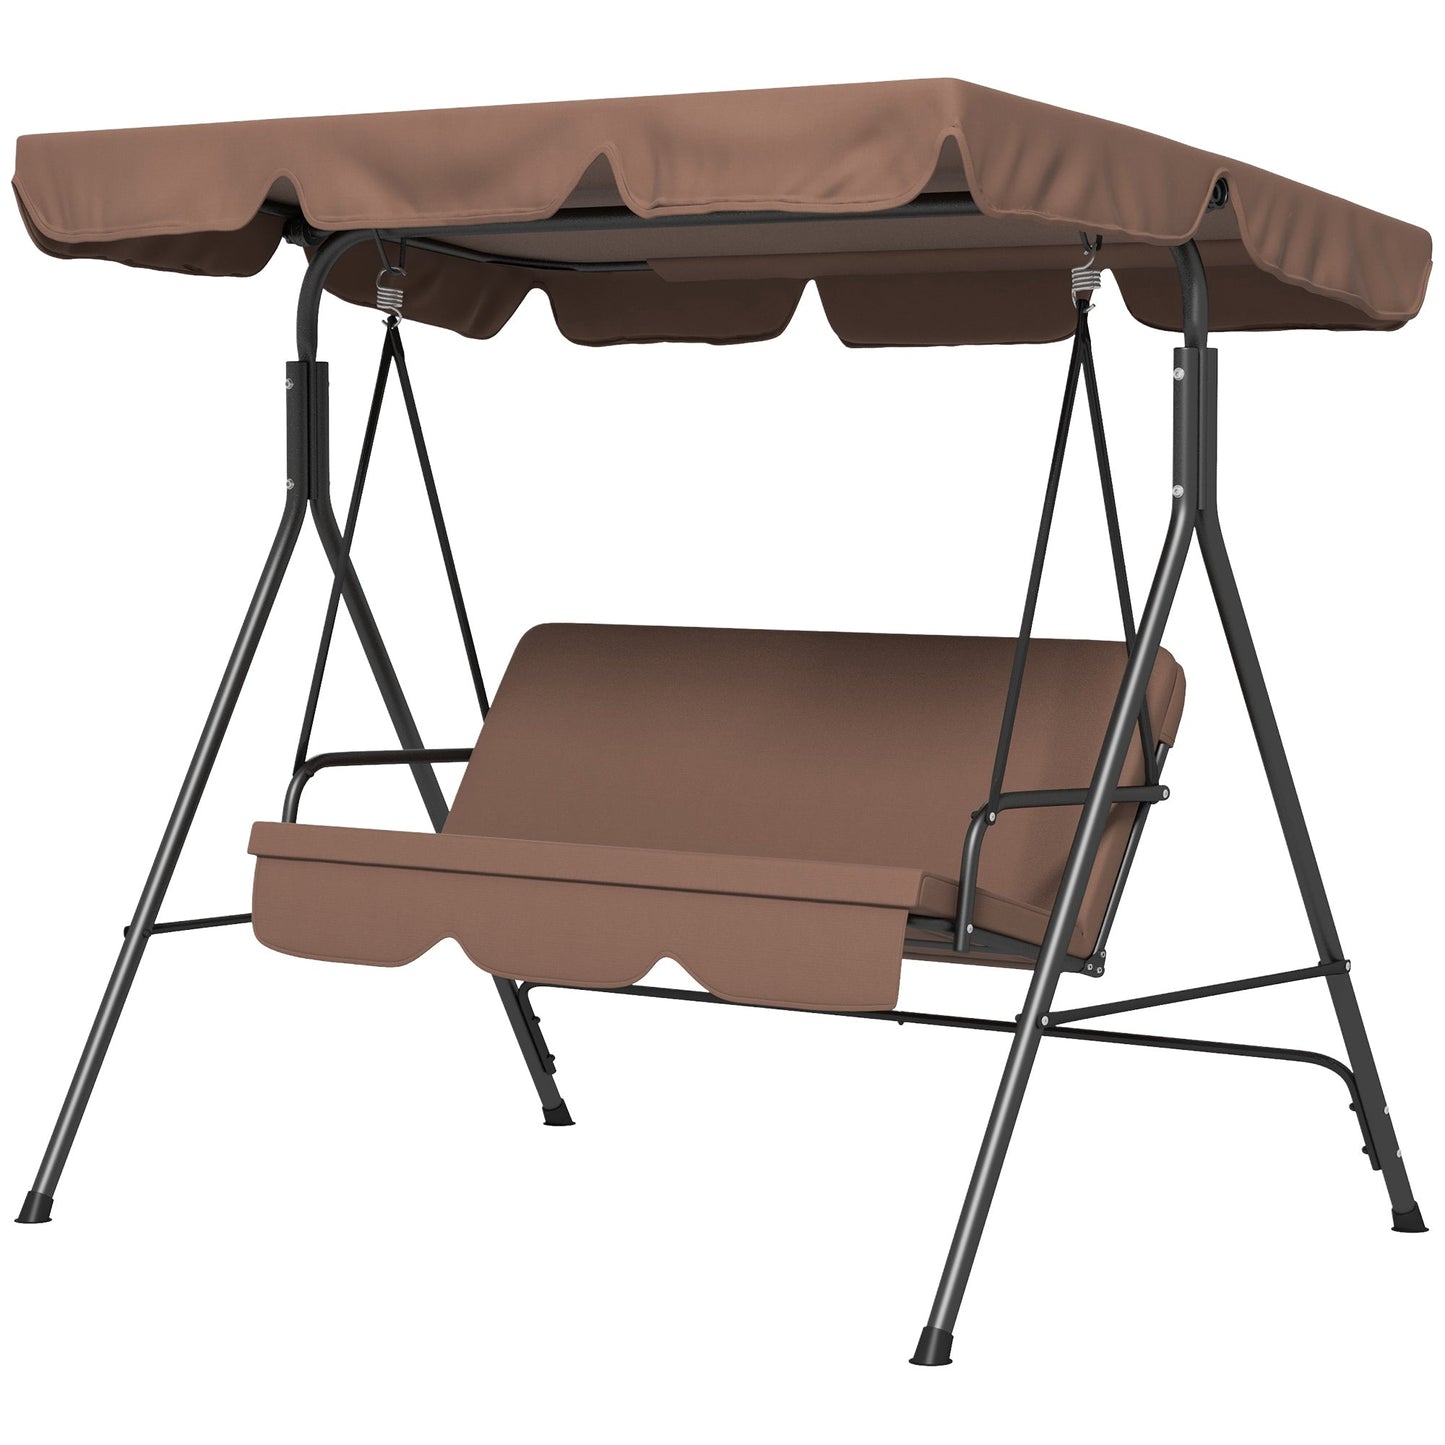 -Outsunny 3-Seat Outdoor Patio Swing Chair w/ Cushion, Steel Frame Stand, Adjustable Tilt Canopy for Patio, Garden, Brown 2 - Outdoor Style Company